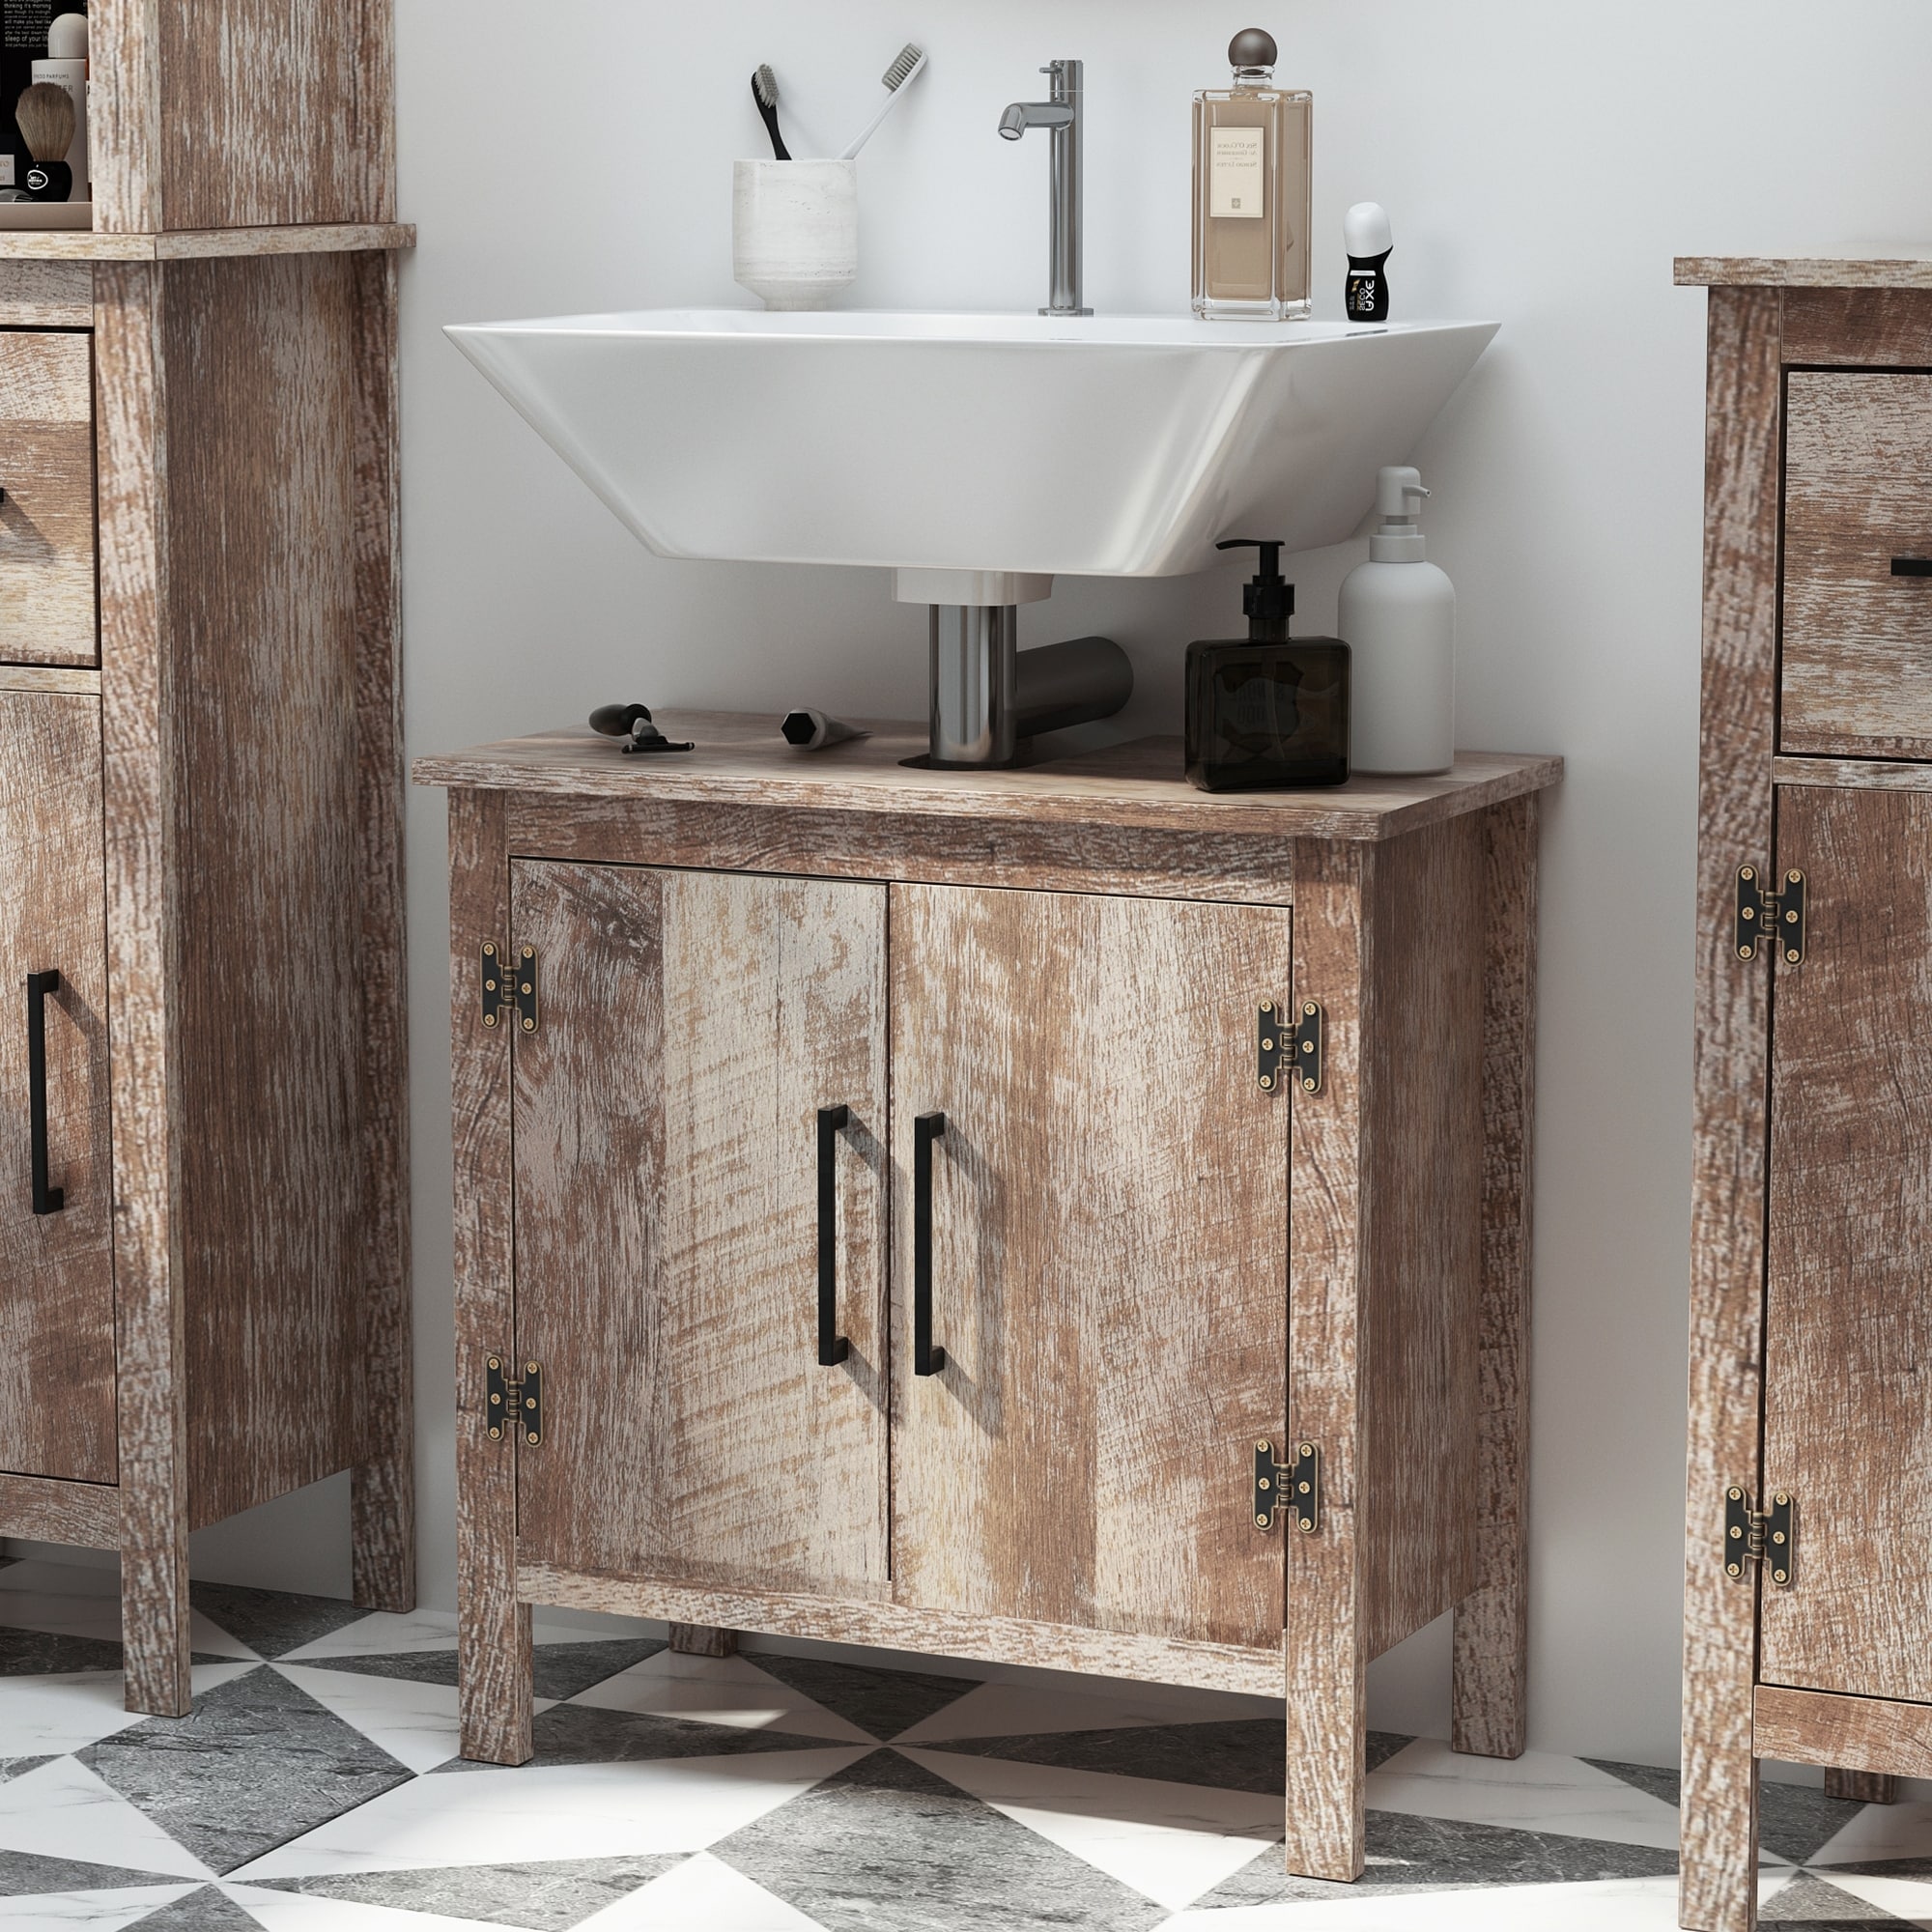 https://ak1.ostkcdn.com/images/products/is/images/direct/6e3bf3b52c9498917dc69211cc598a86aef3f72b/kleankin-Wooden-Under-Sink-Bathroom-Floor-Storage-Cabinet-with-Double-Door-Space-Saver-Organizer%2C-Barnwood.jpg